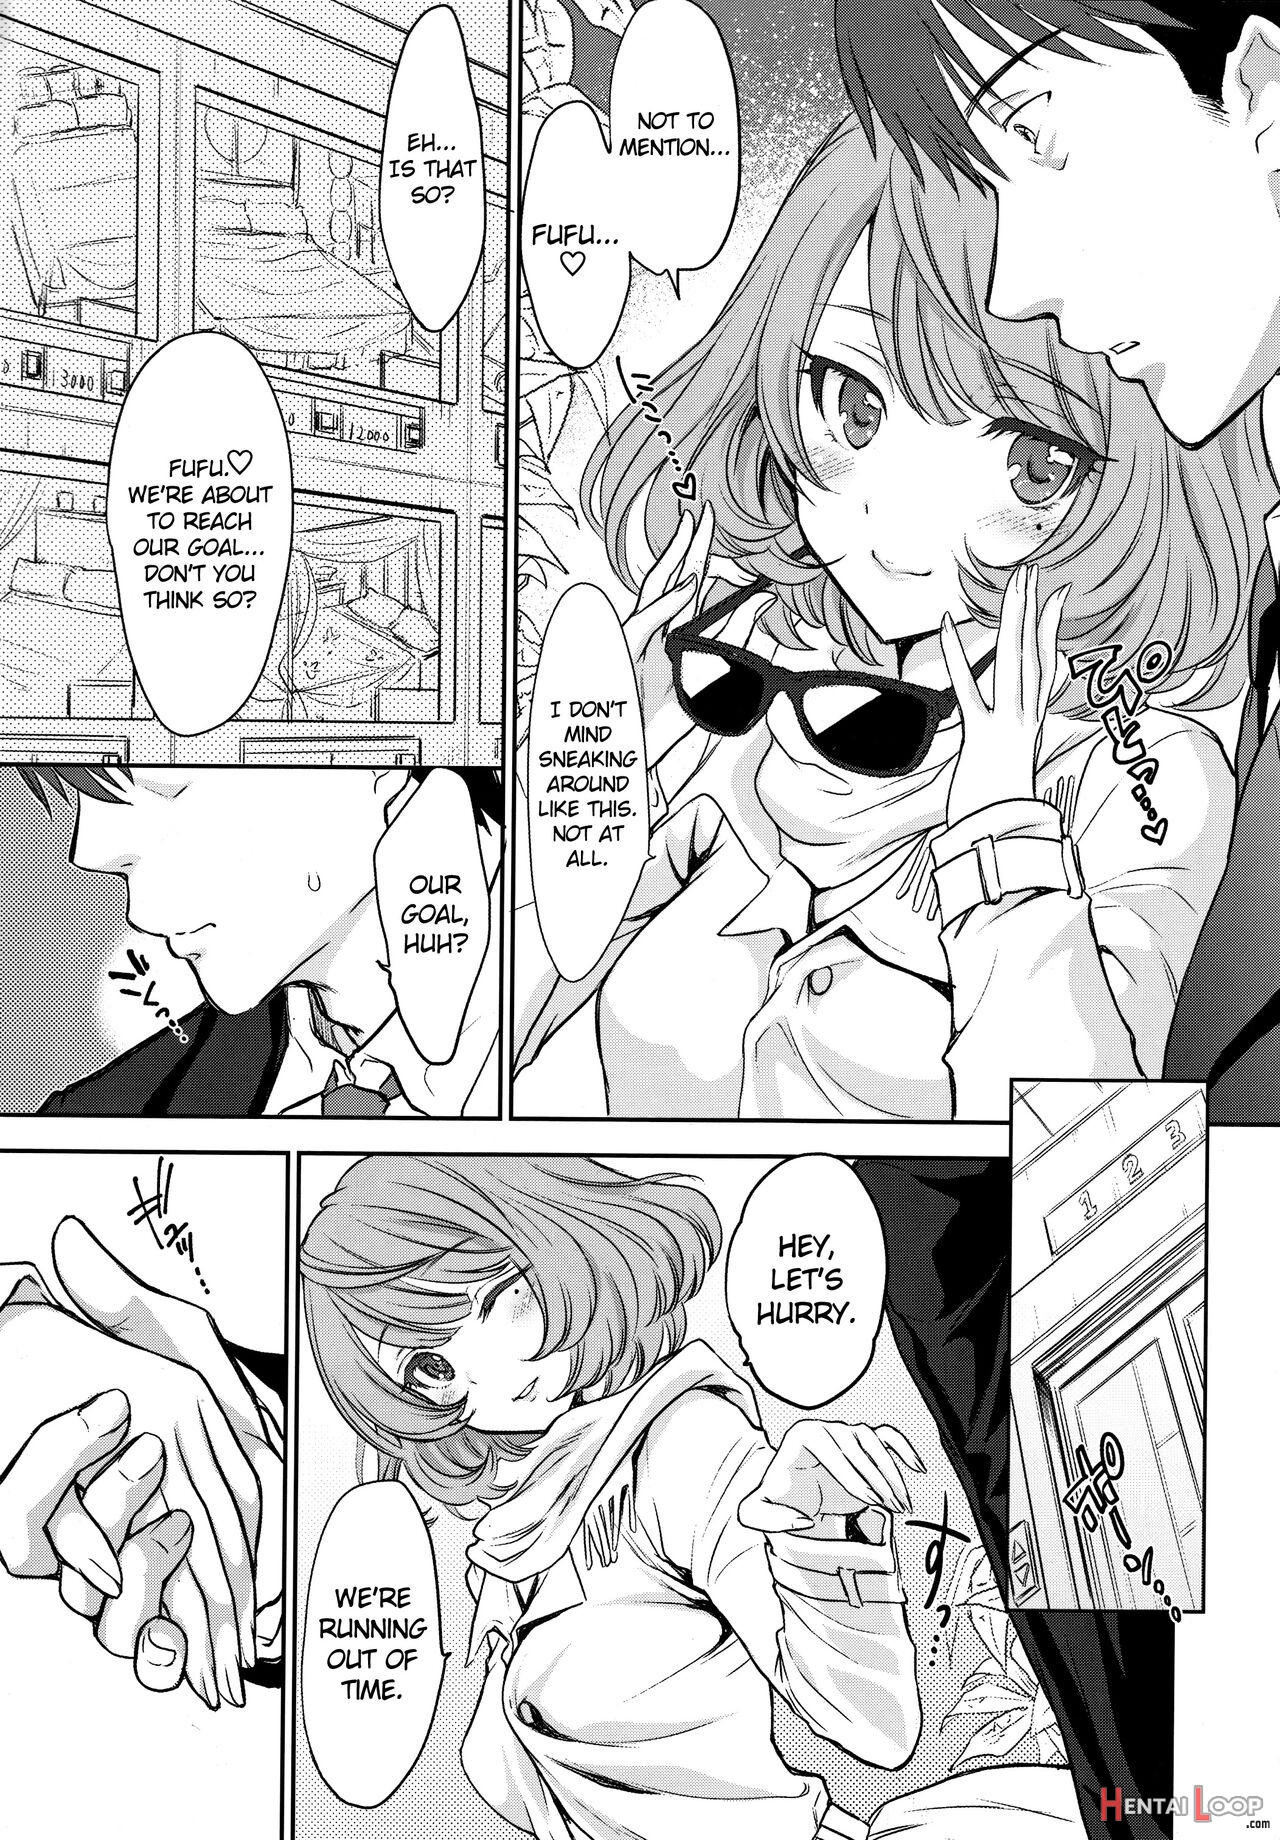 Meeting With Kaede-san In A Love Hotel page 3